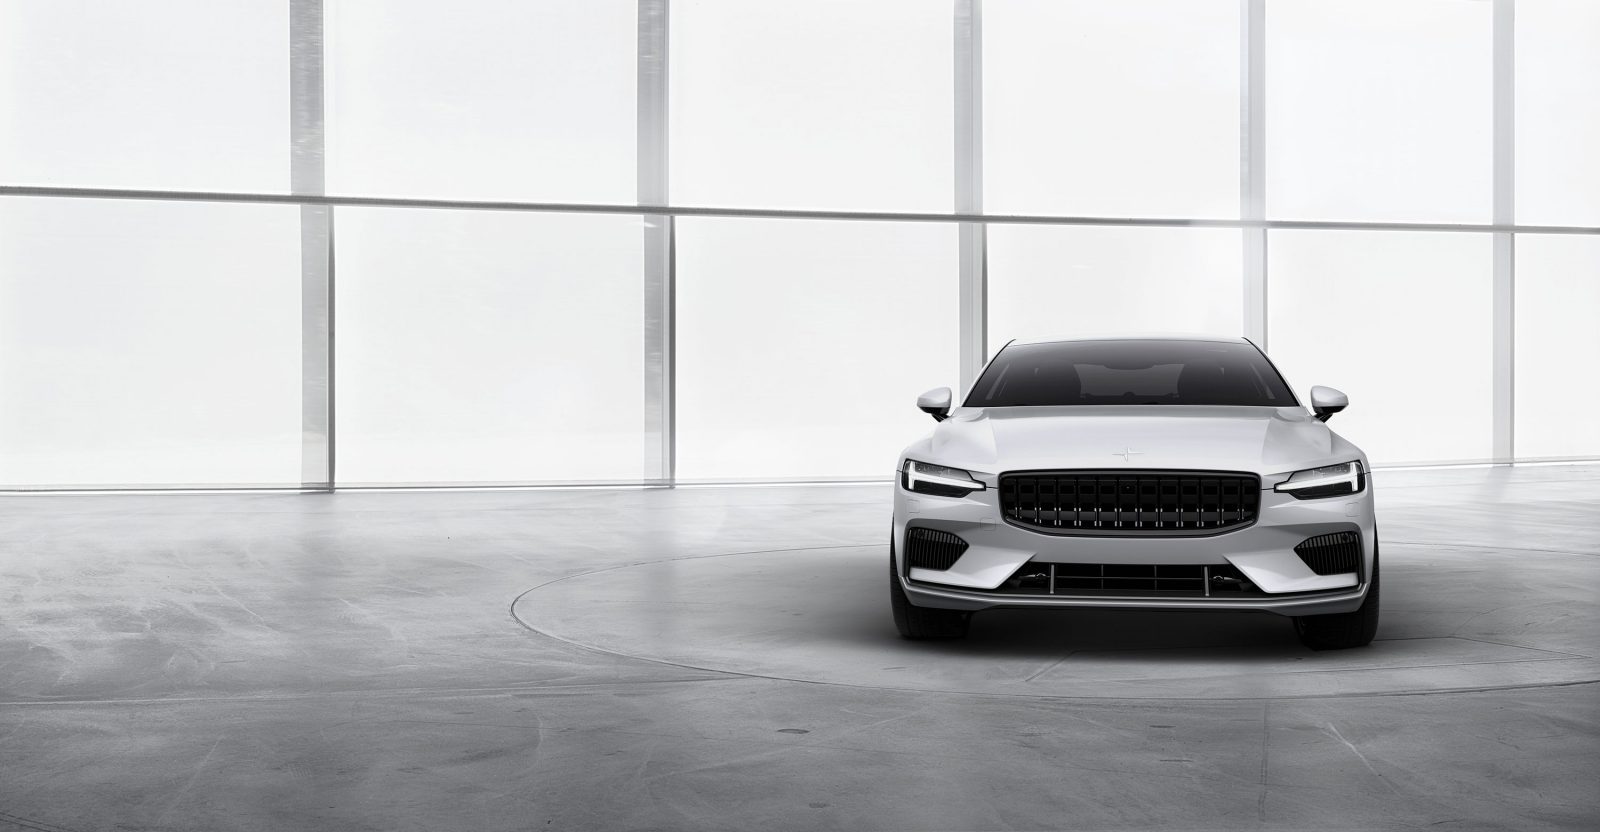 Volvo plans to become a serious competitor to Tesla in the electric vehicle market.